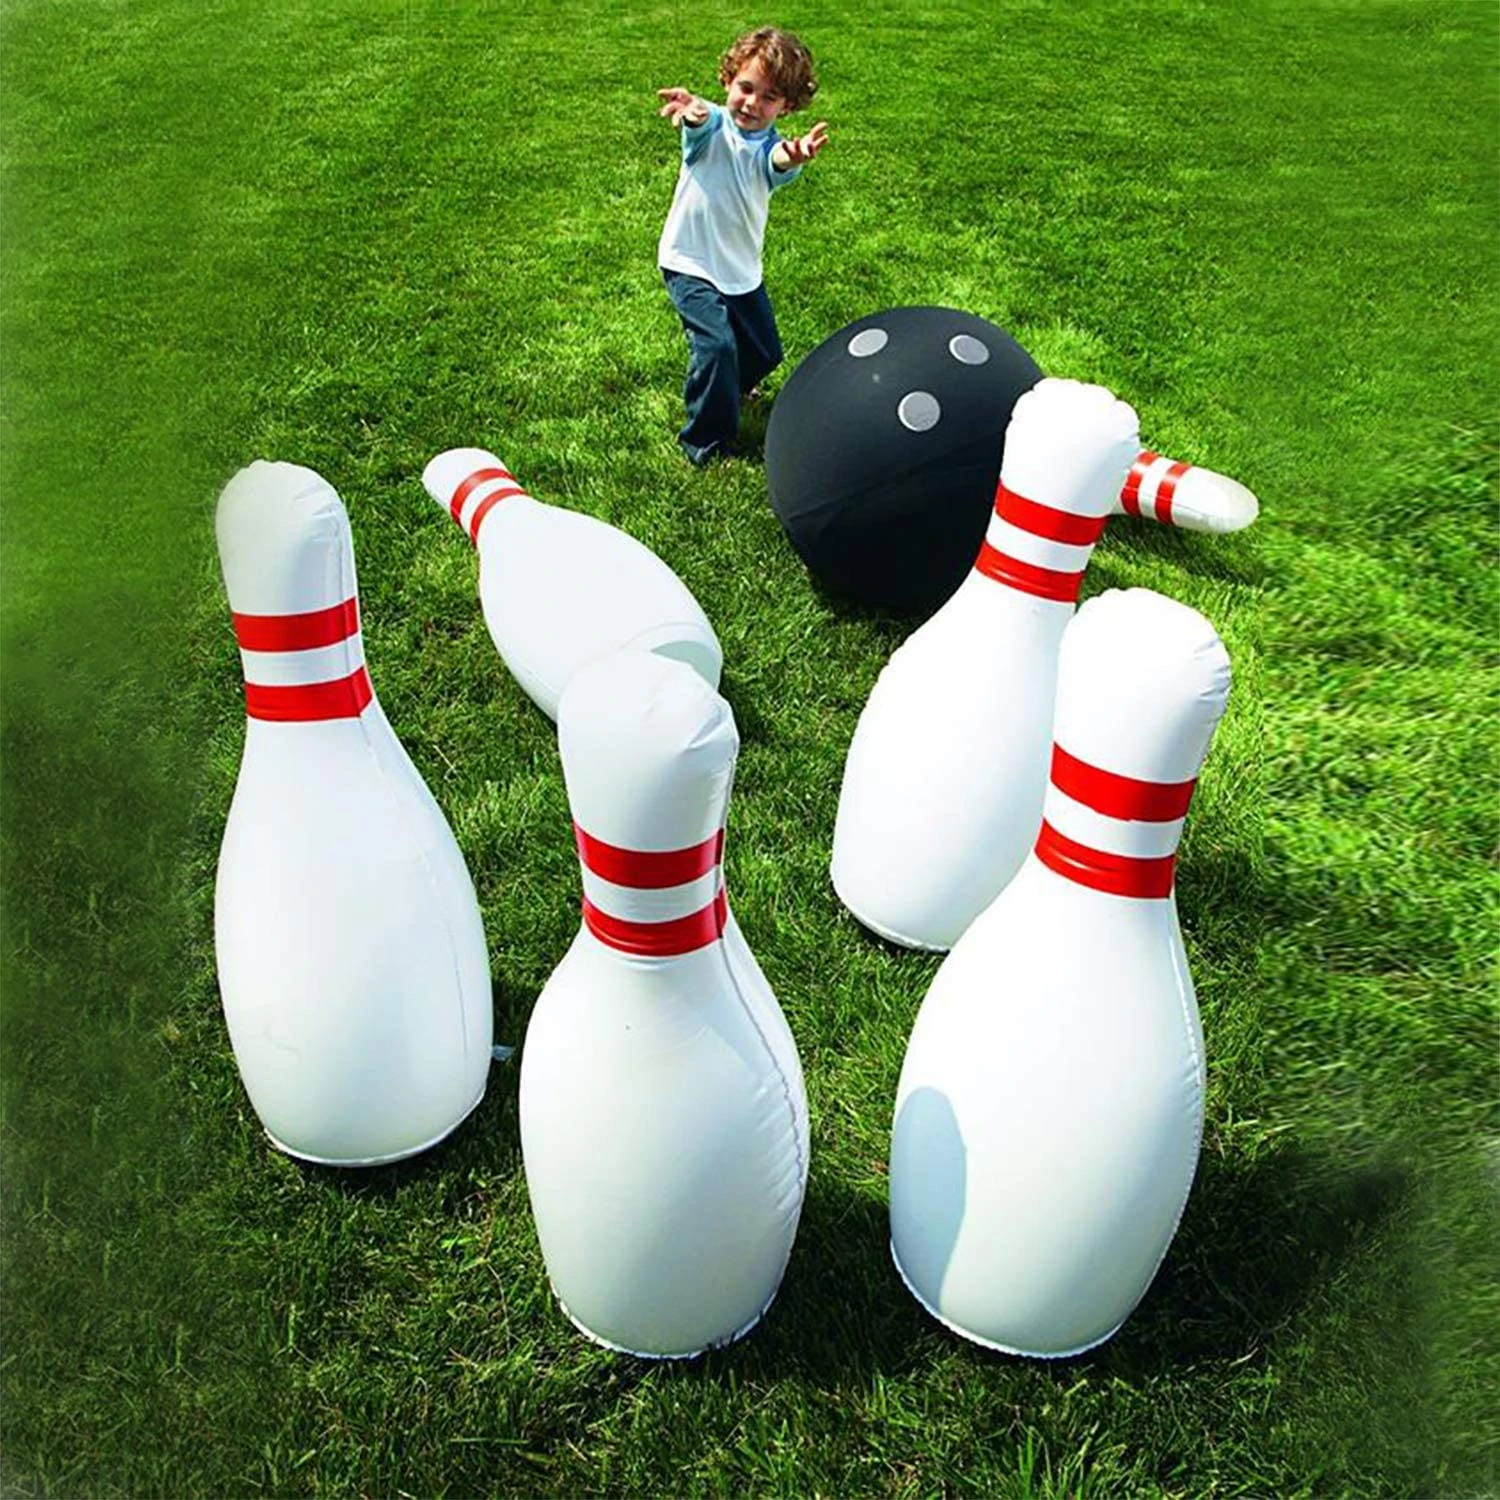 Inflatable Bowling Set Party Toys Includes One Big Ball and 6 Inflatable Bowling Pins Jumbo Bowling Set Game For Kids